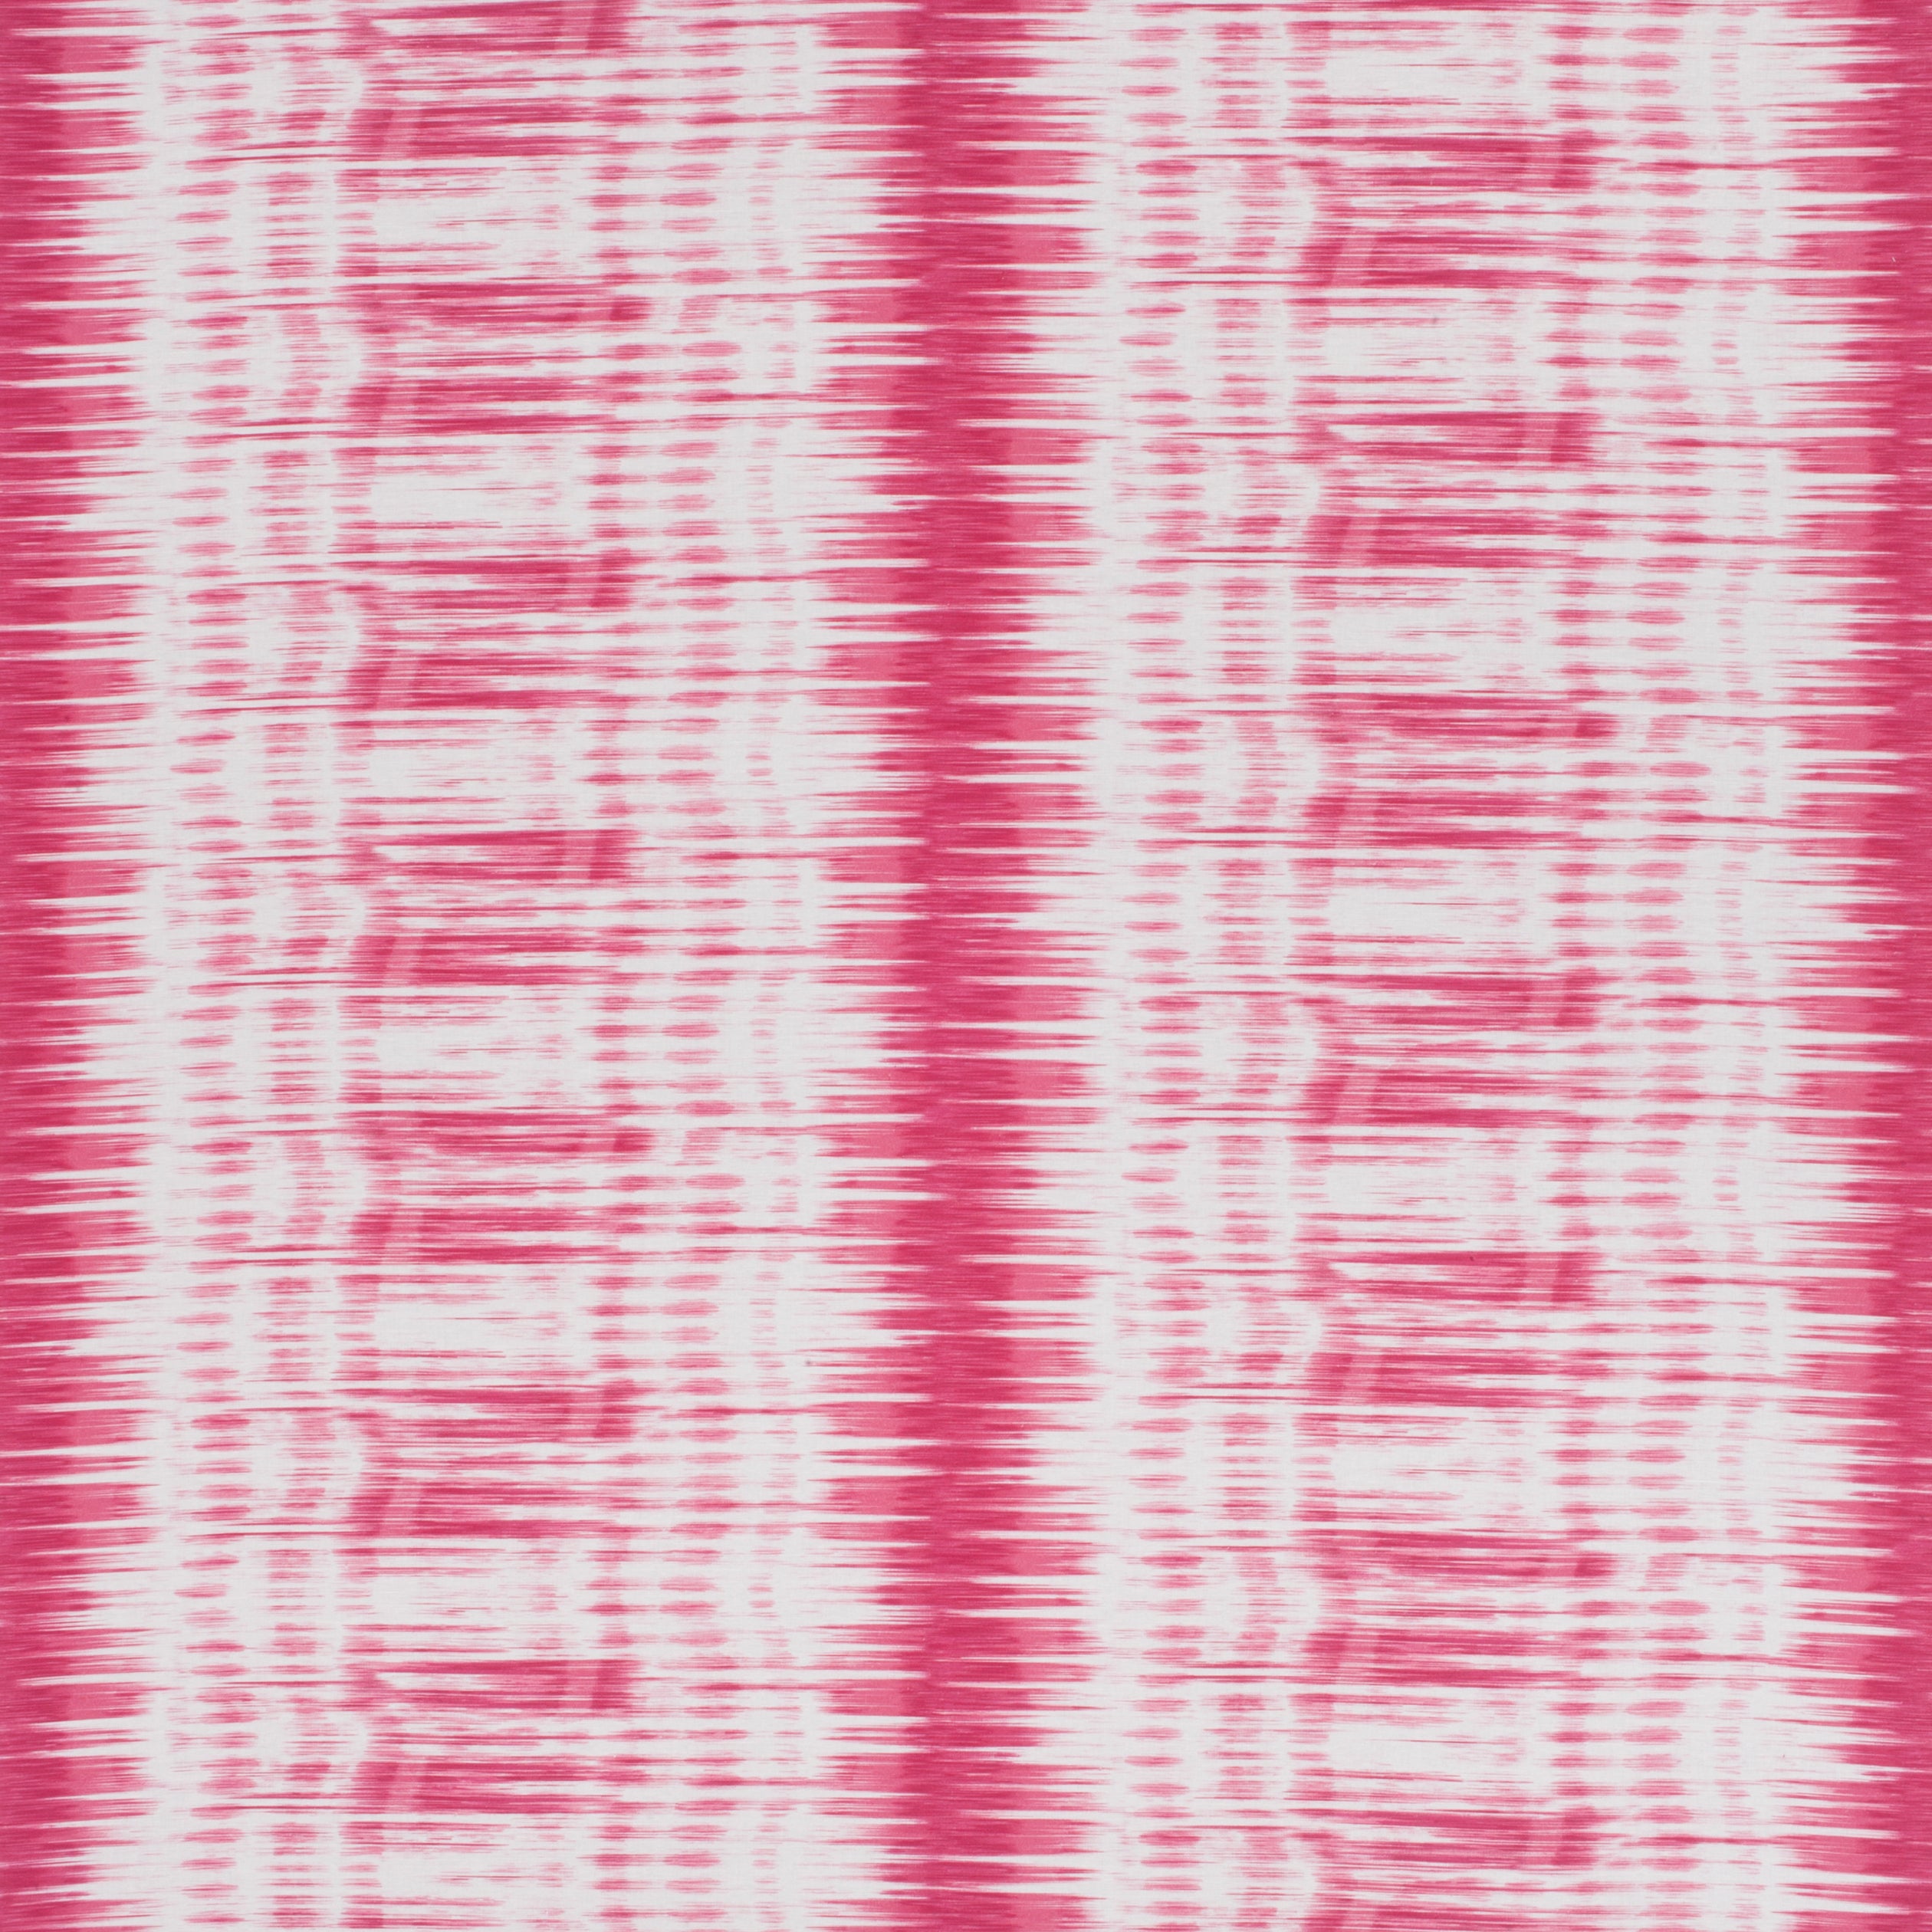 Ikat Stripe fabric in pink color - pattern number F988703 - by Thibaut in the Trade Routes collection